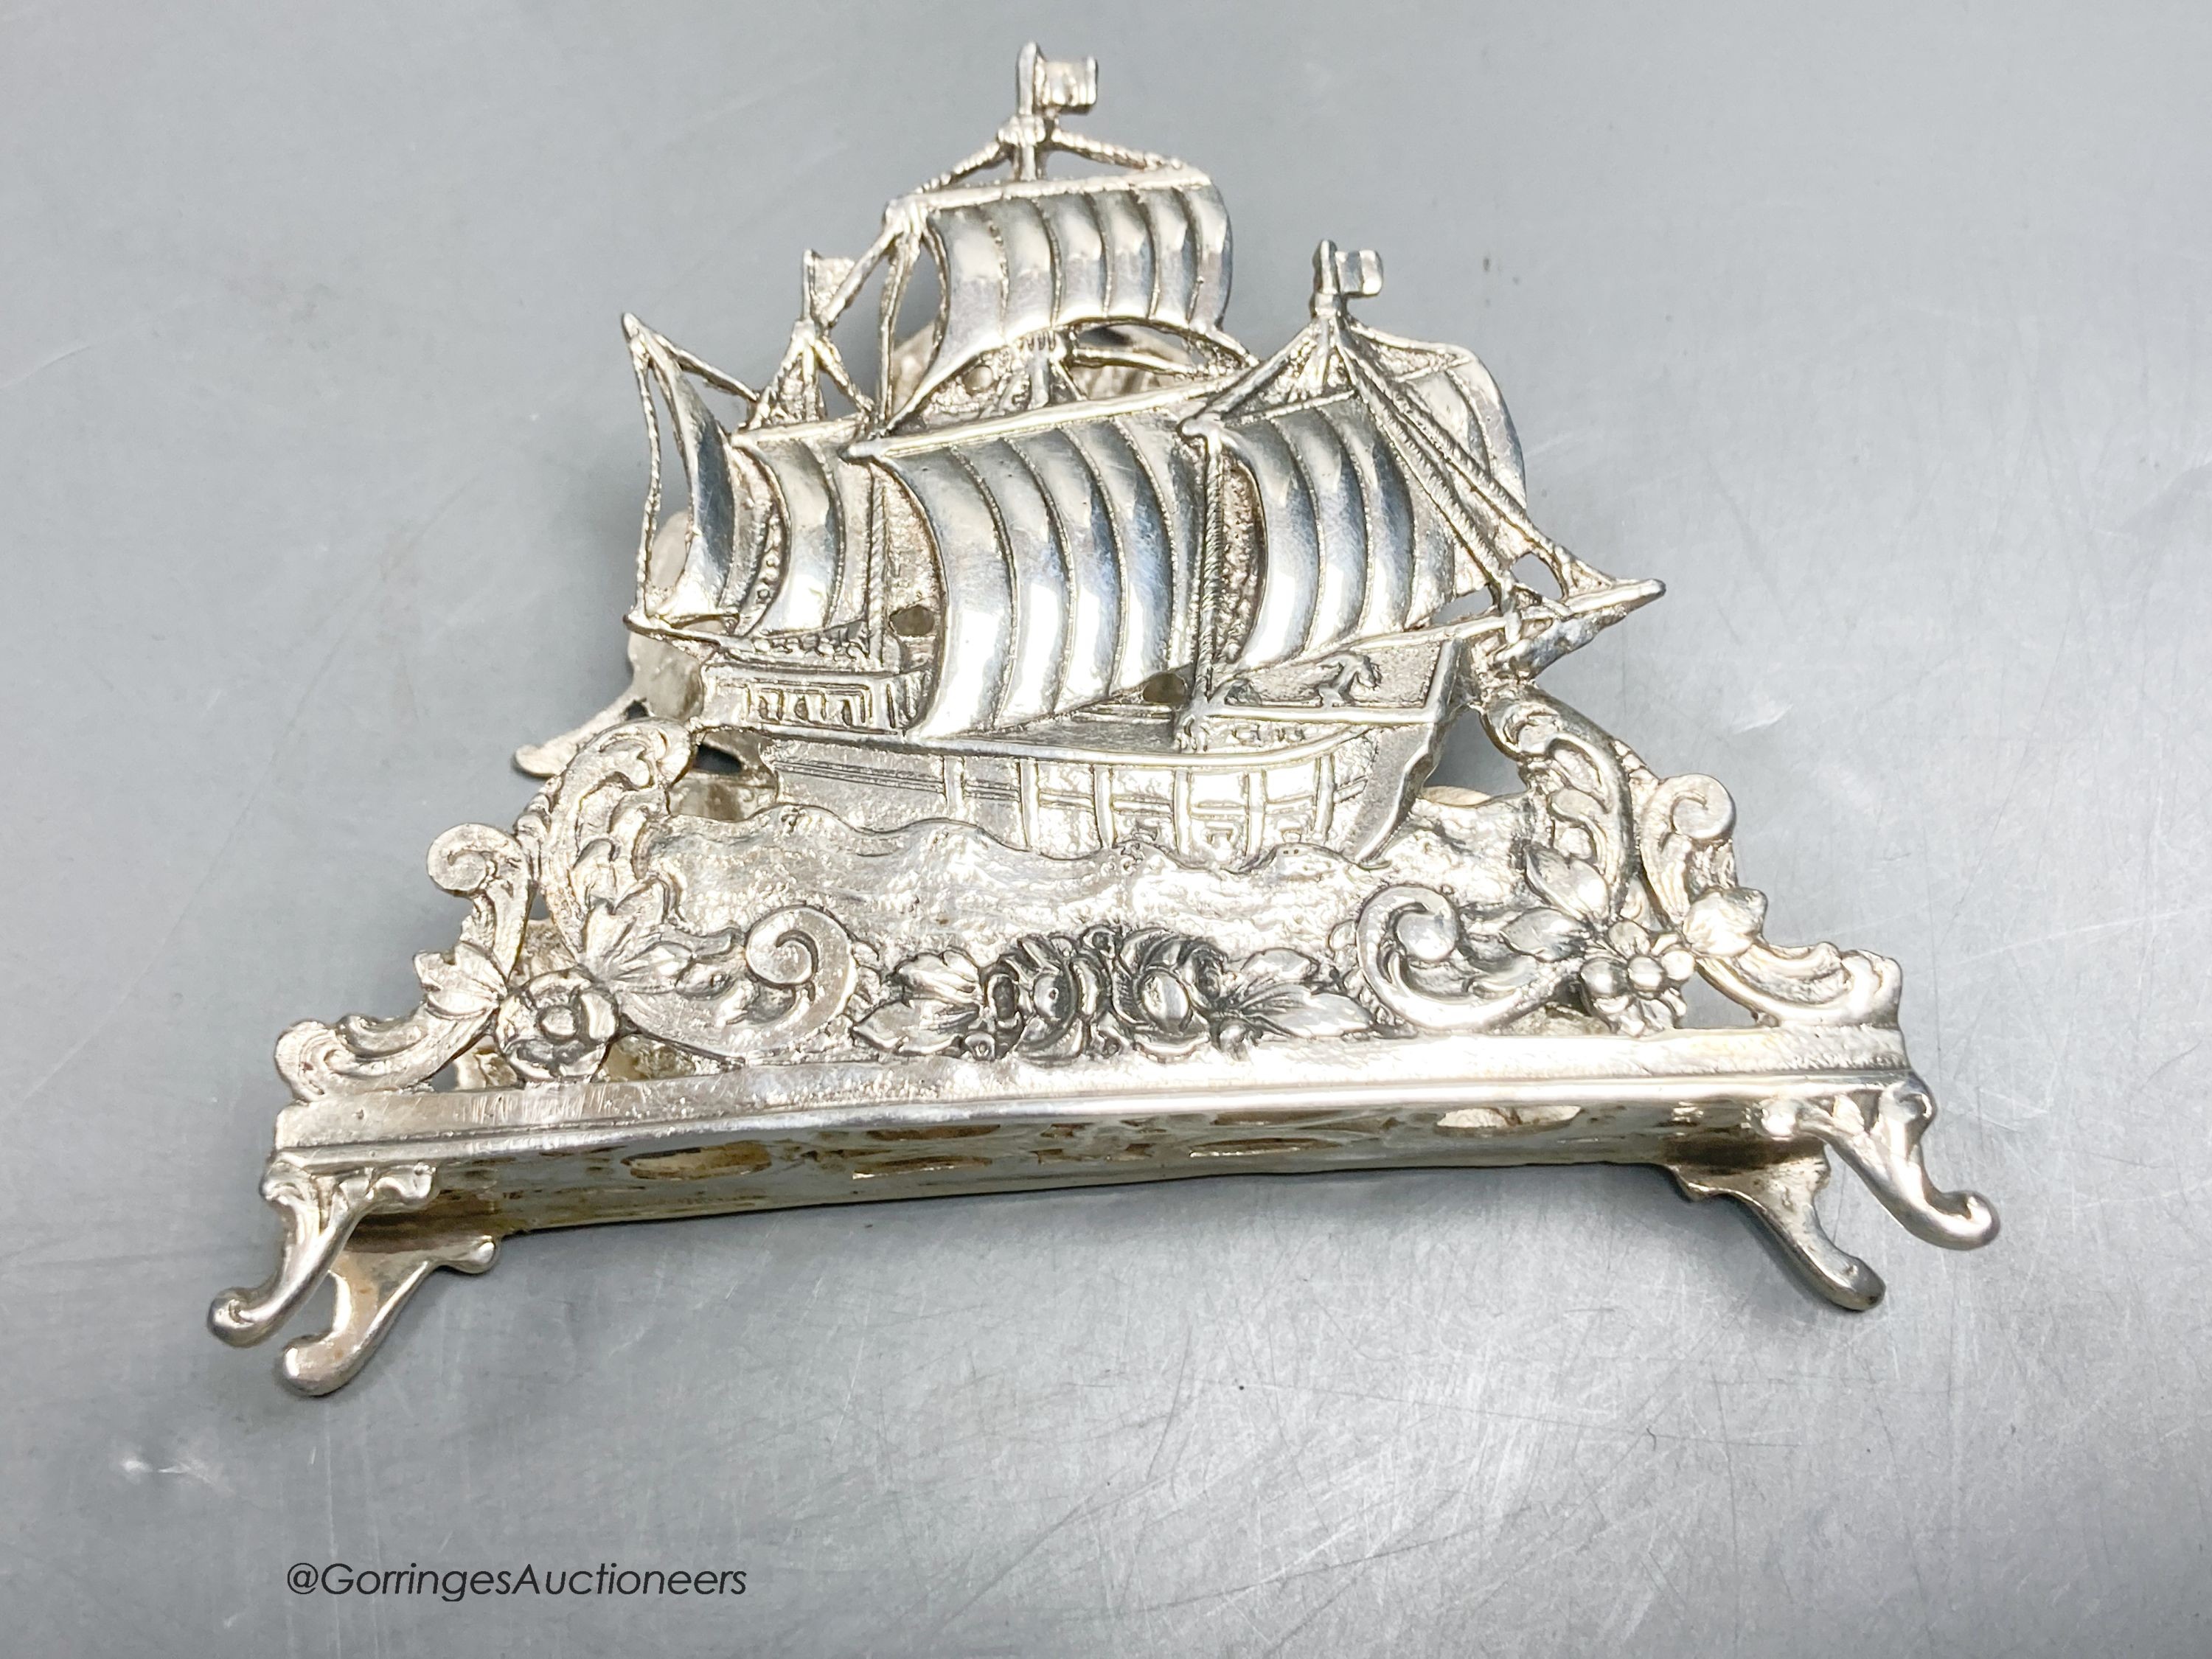 Two early 20th century German 800 standard pierced white metal letter racks, decorated with sailing ships, longest 13.8cm